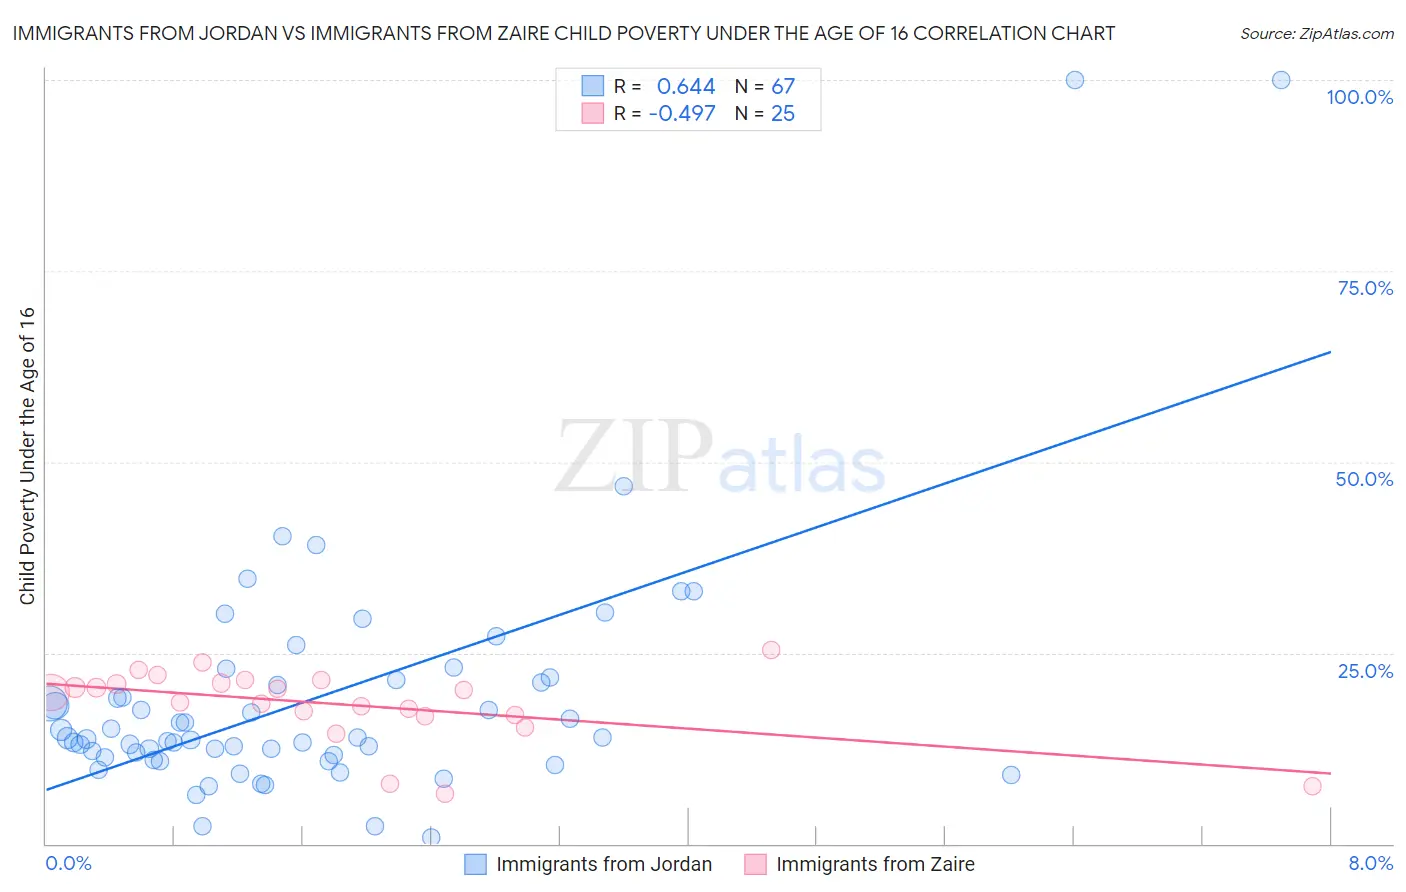 Immigrants from Jordan vs Immigrants from Zaire Child Poverty Under the Age of 16